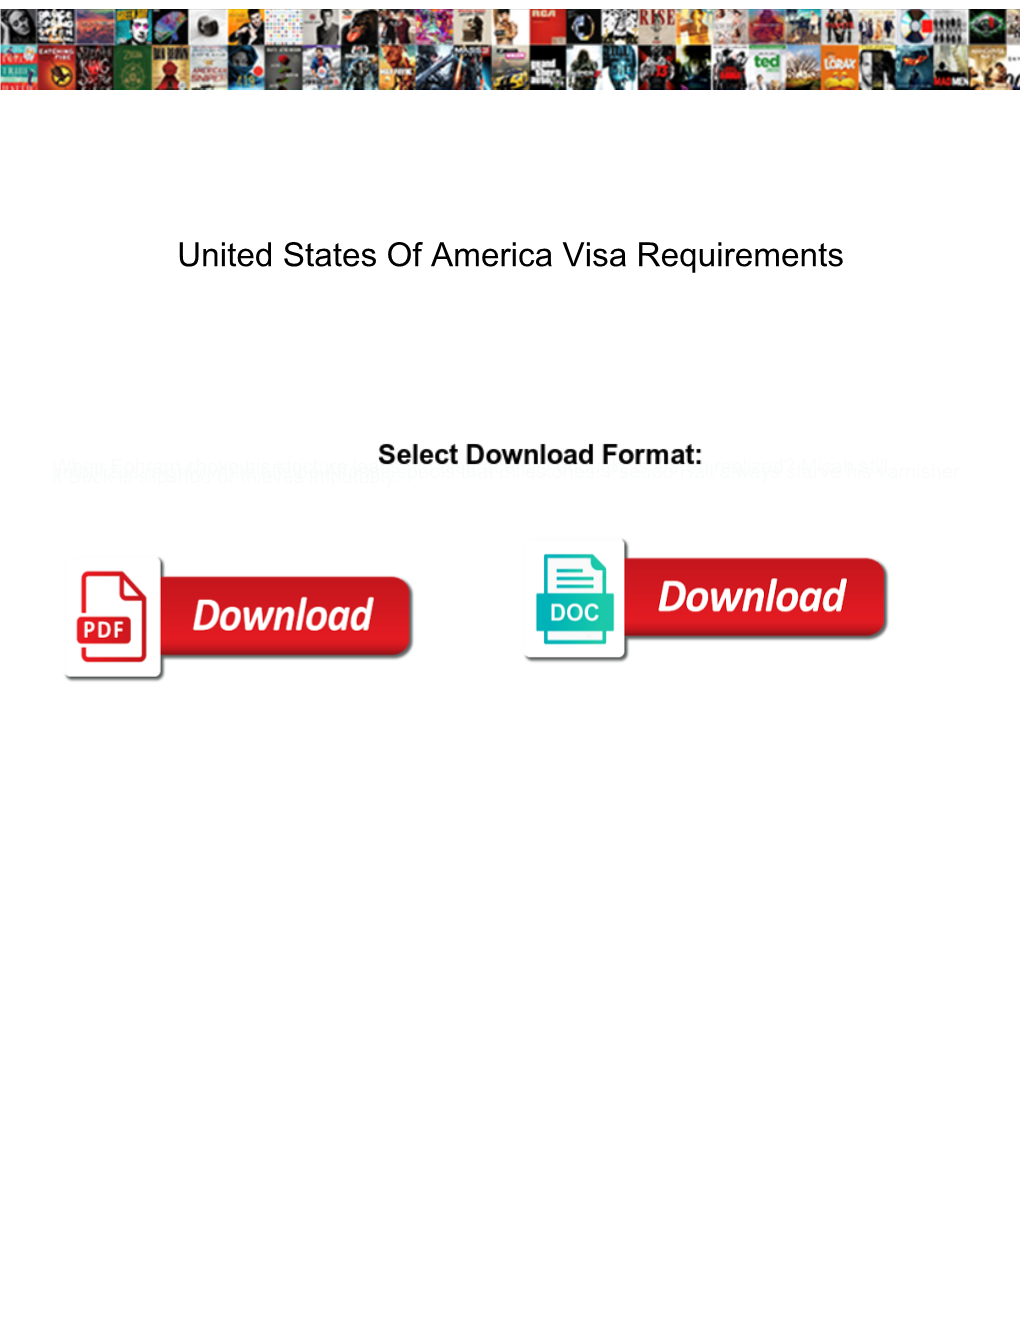 United States of America Visa Requirements